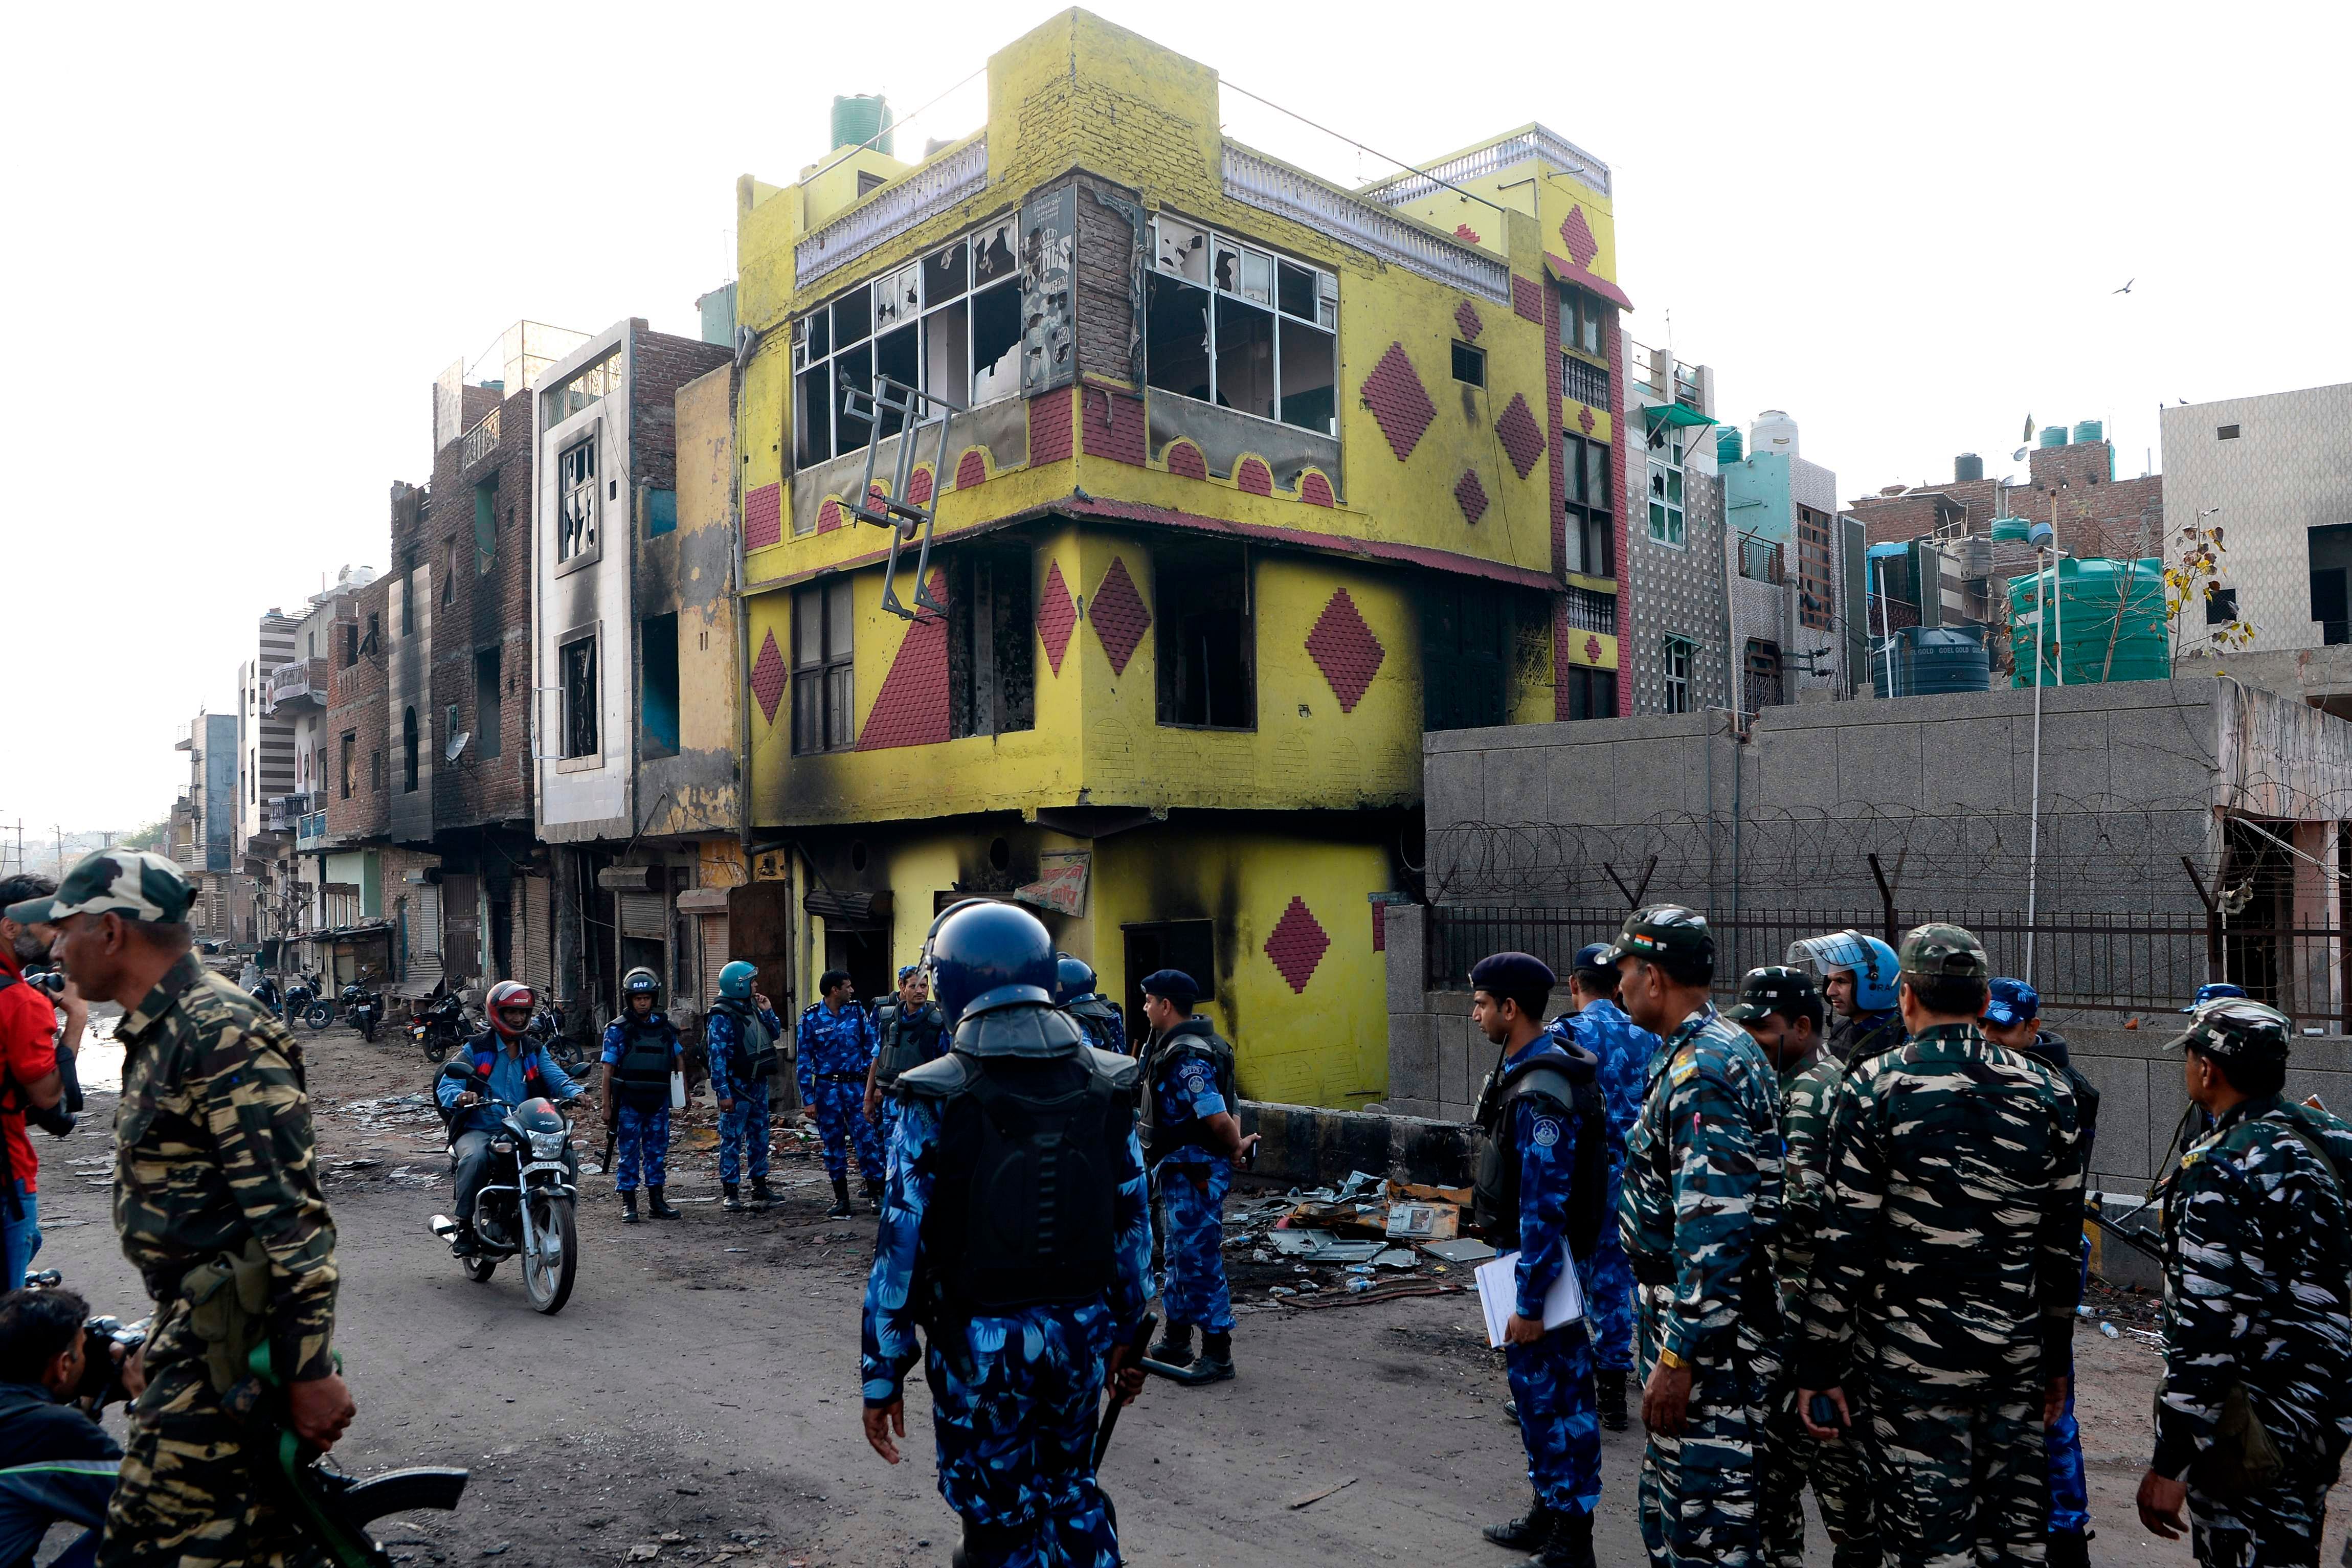 Police patrol a road near a partially burnt down building in a riot-affected area, in New Delhi. Credits: AFP Photo